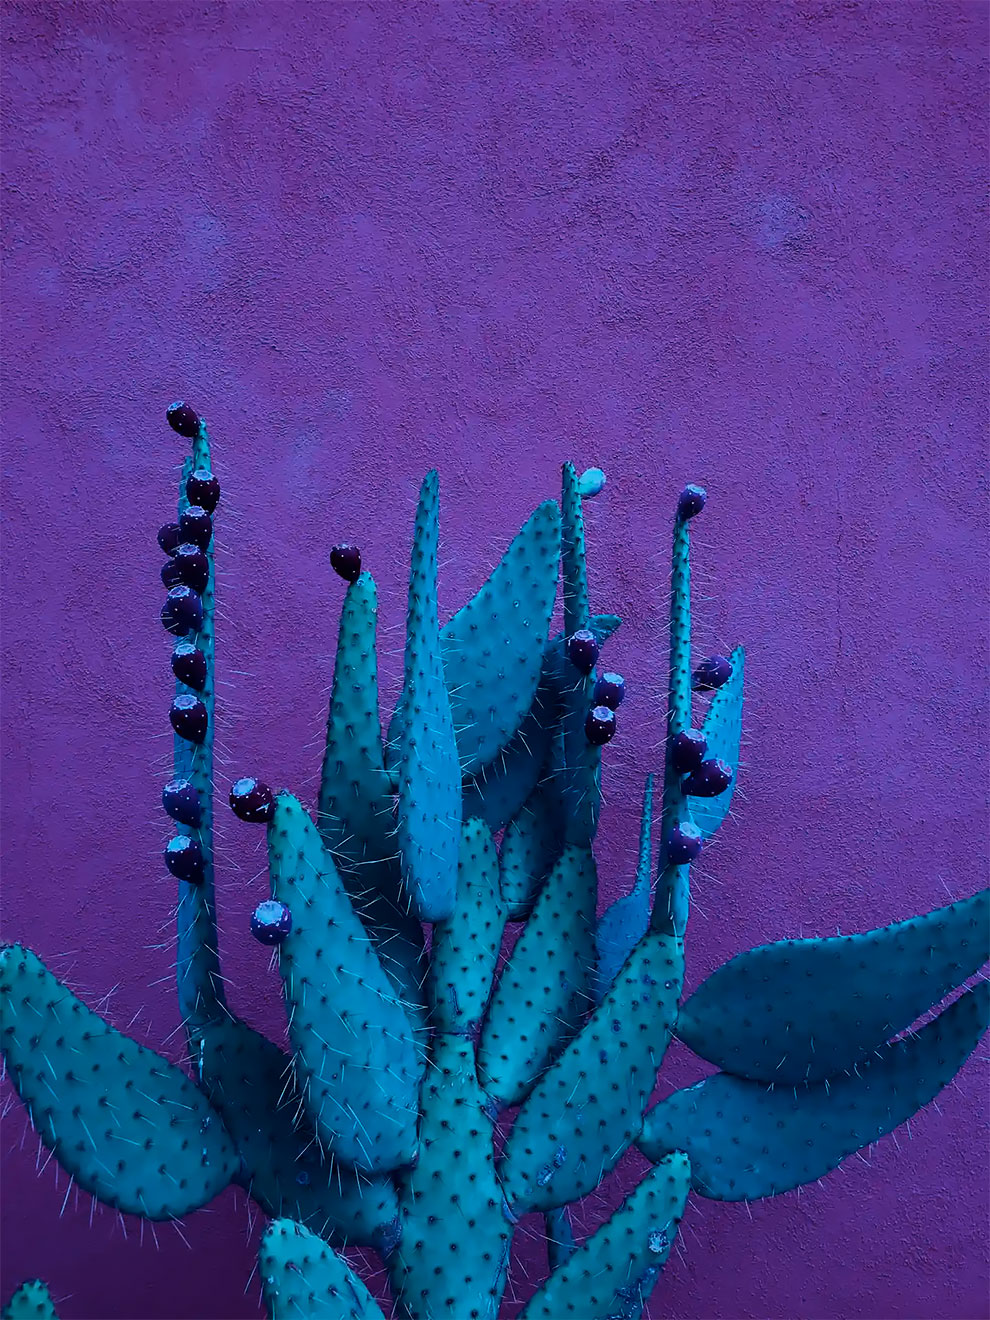 Second place – nature. Midnight Succulent